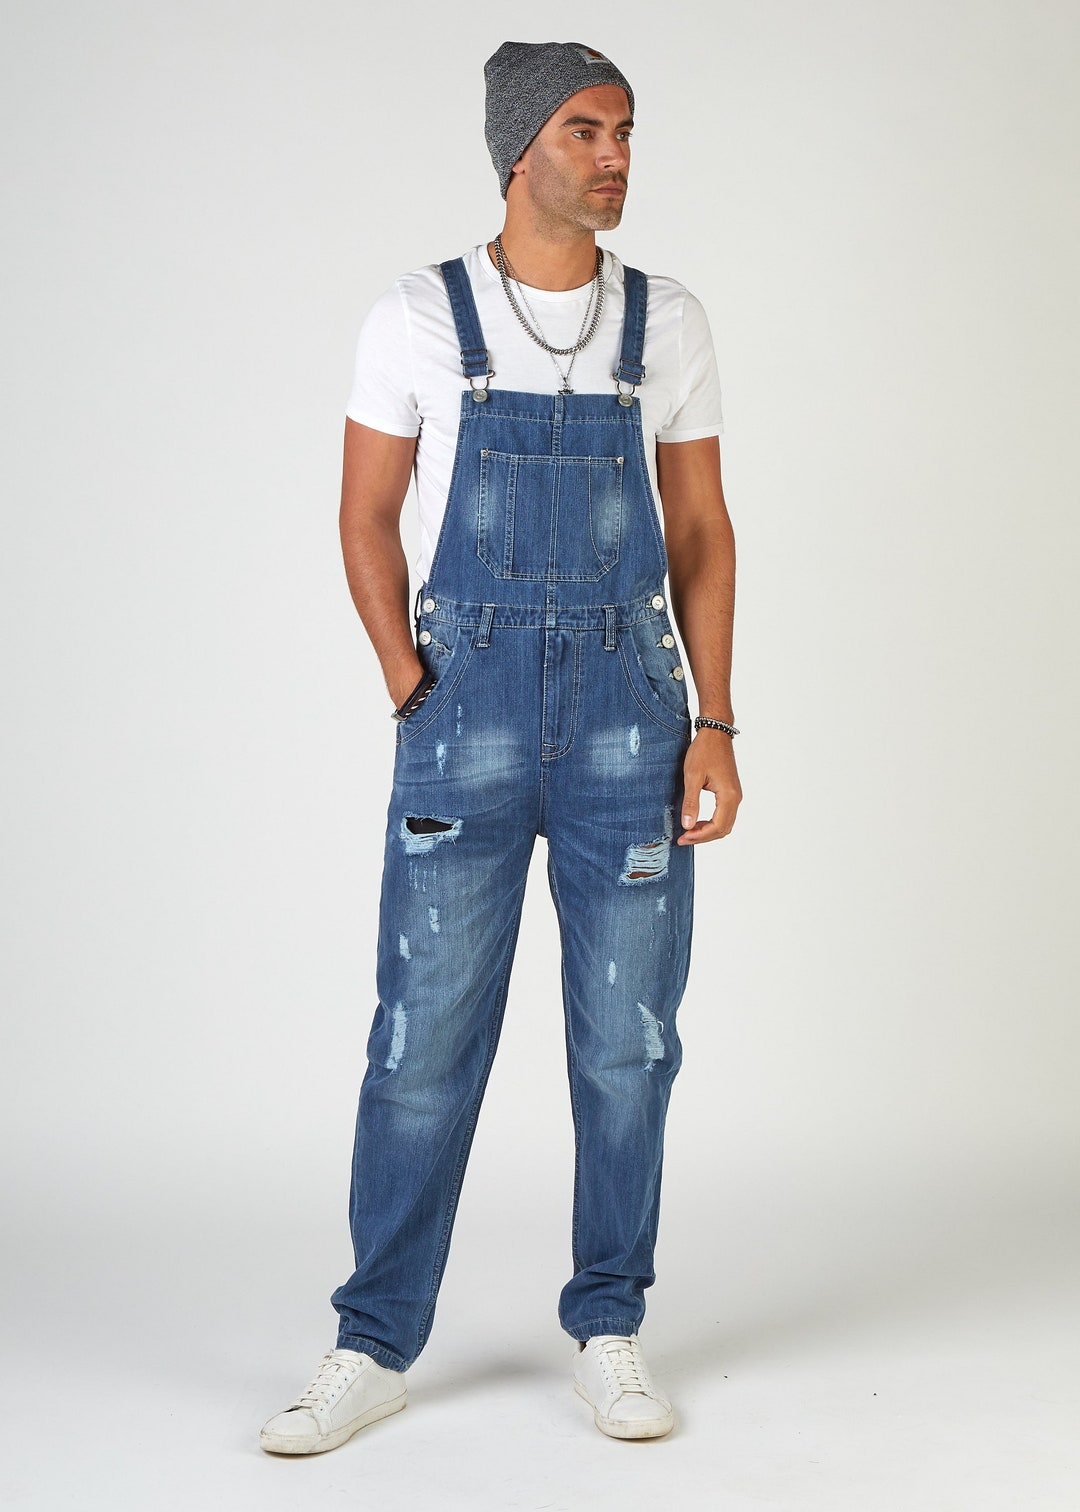 BERTIE Mens Loose Fit Dungarees Midwash With Rips - Etsy